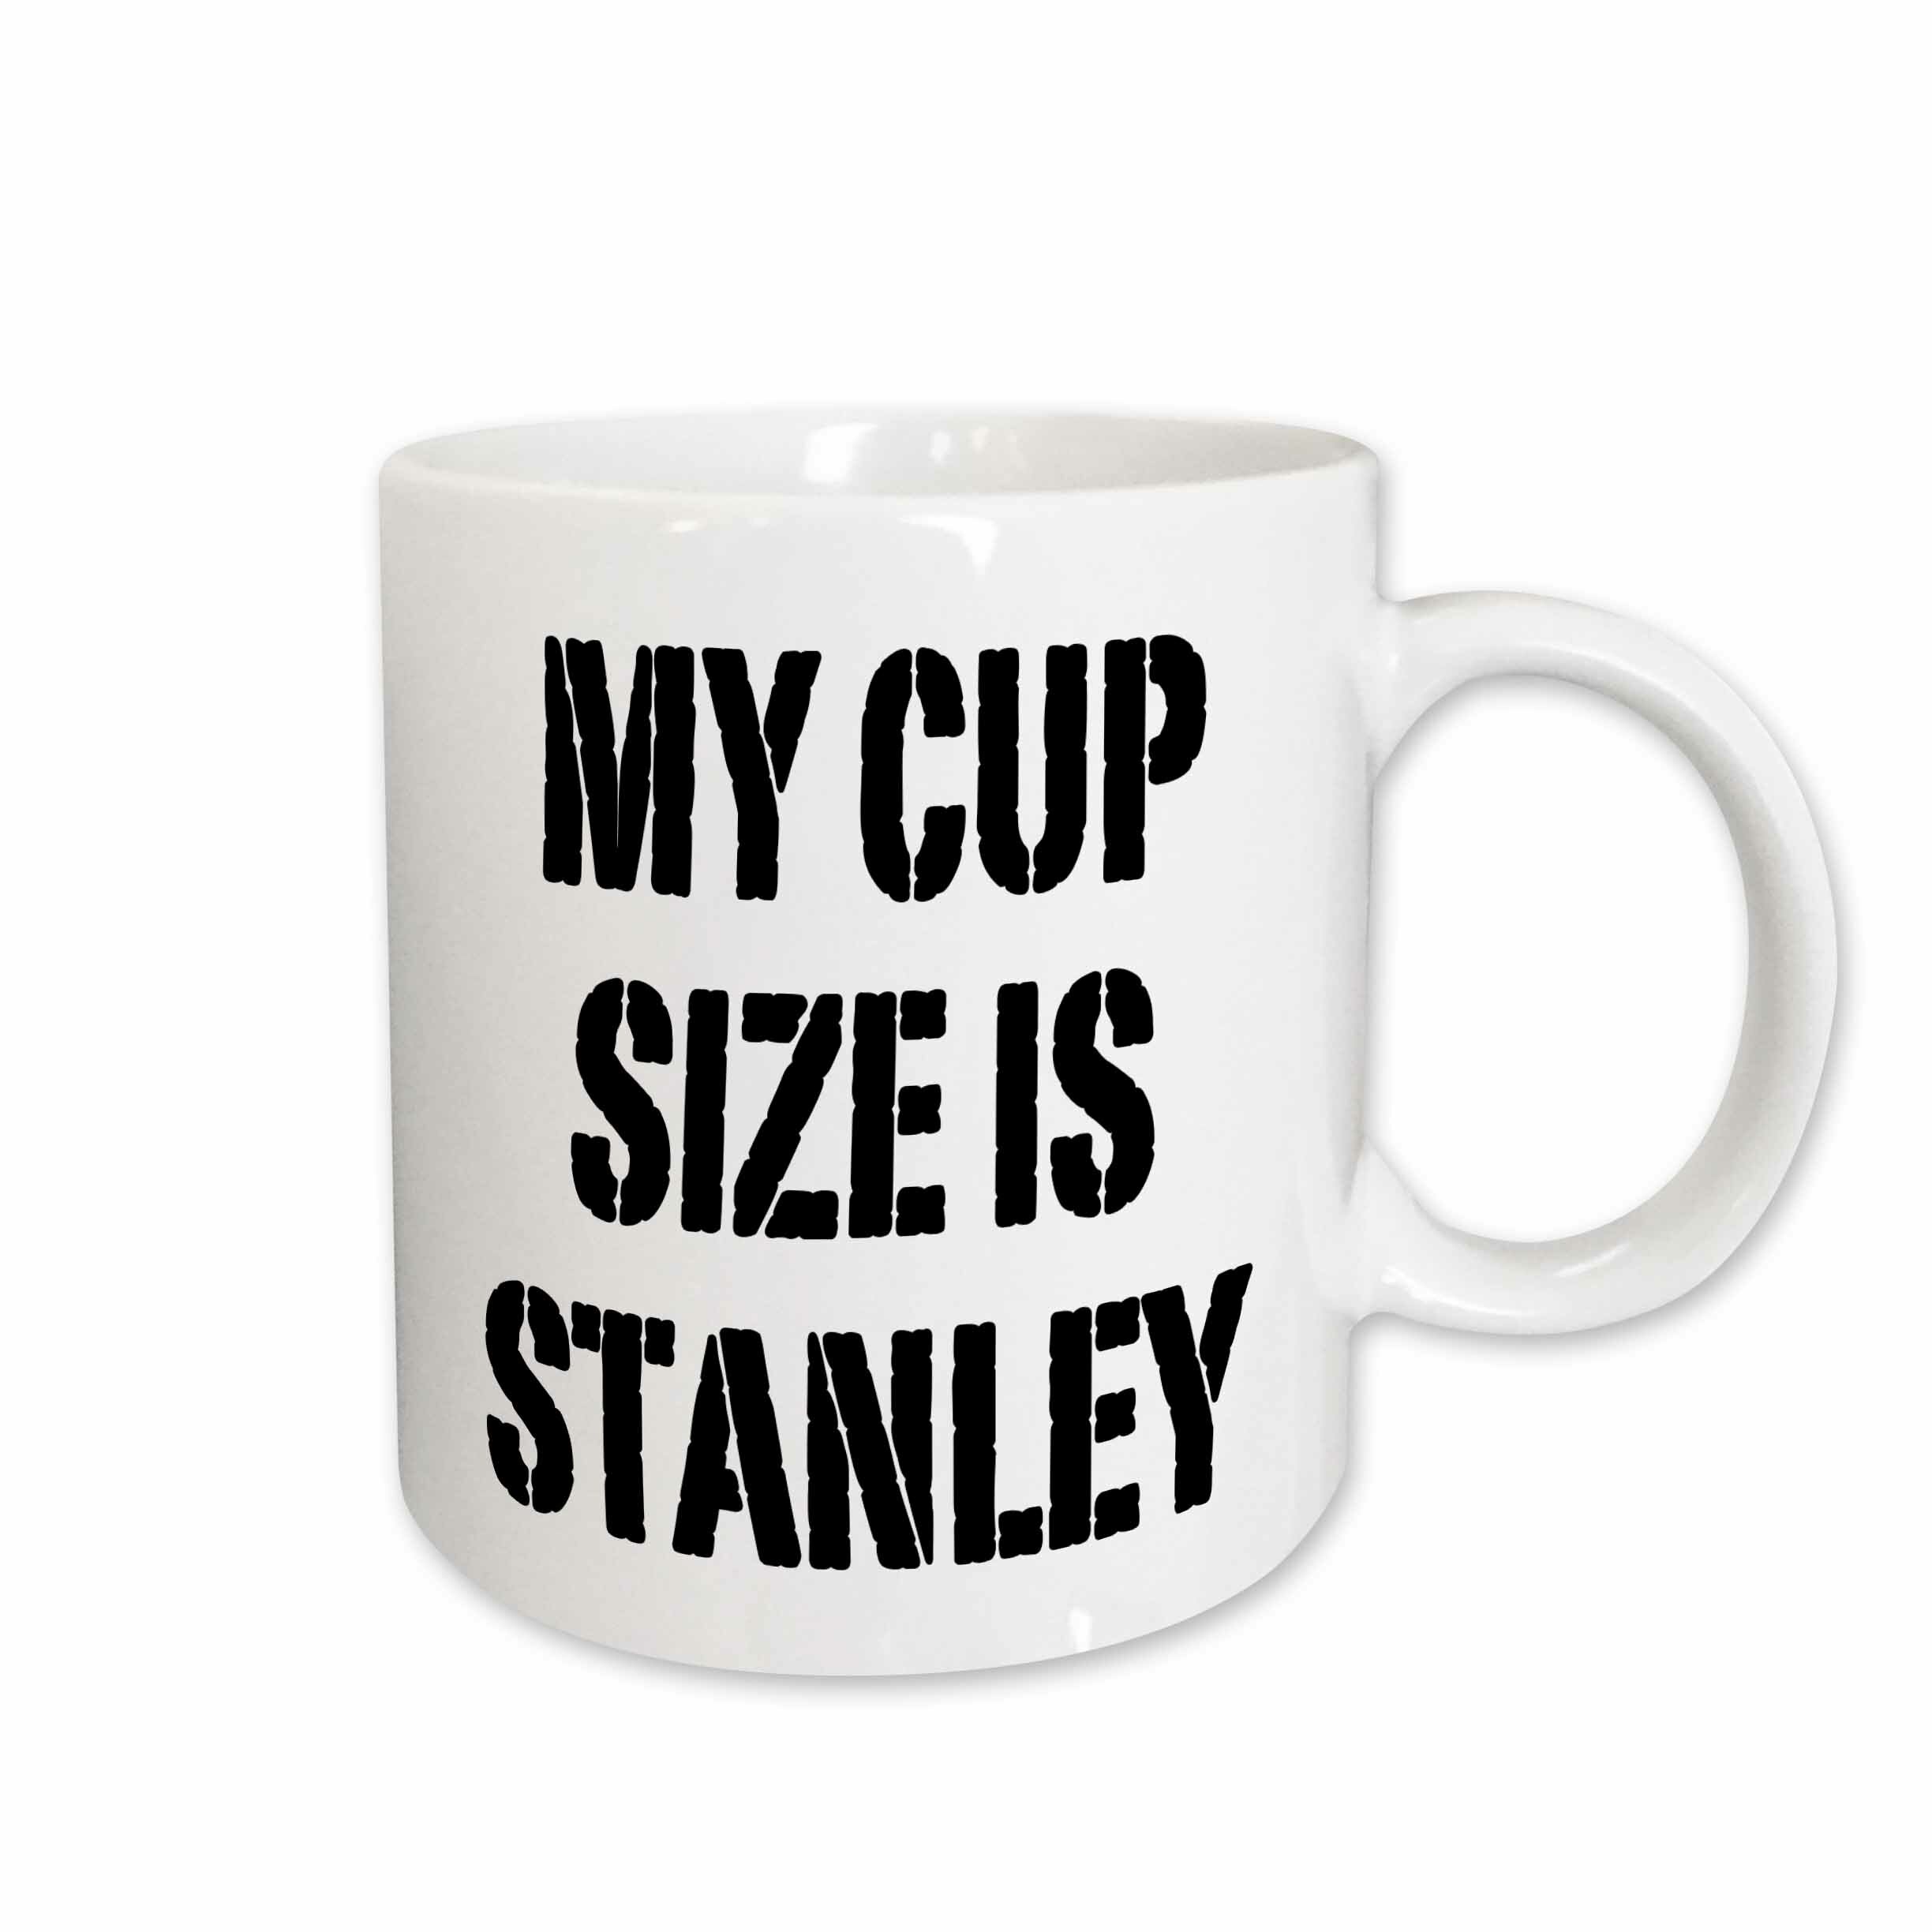 Size my stanley cup is Boston Hockey